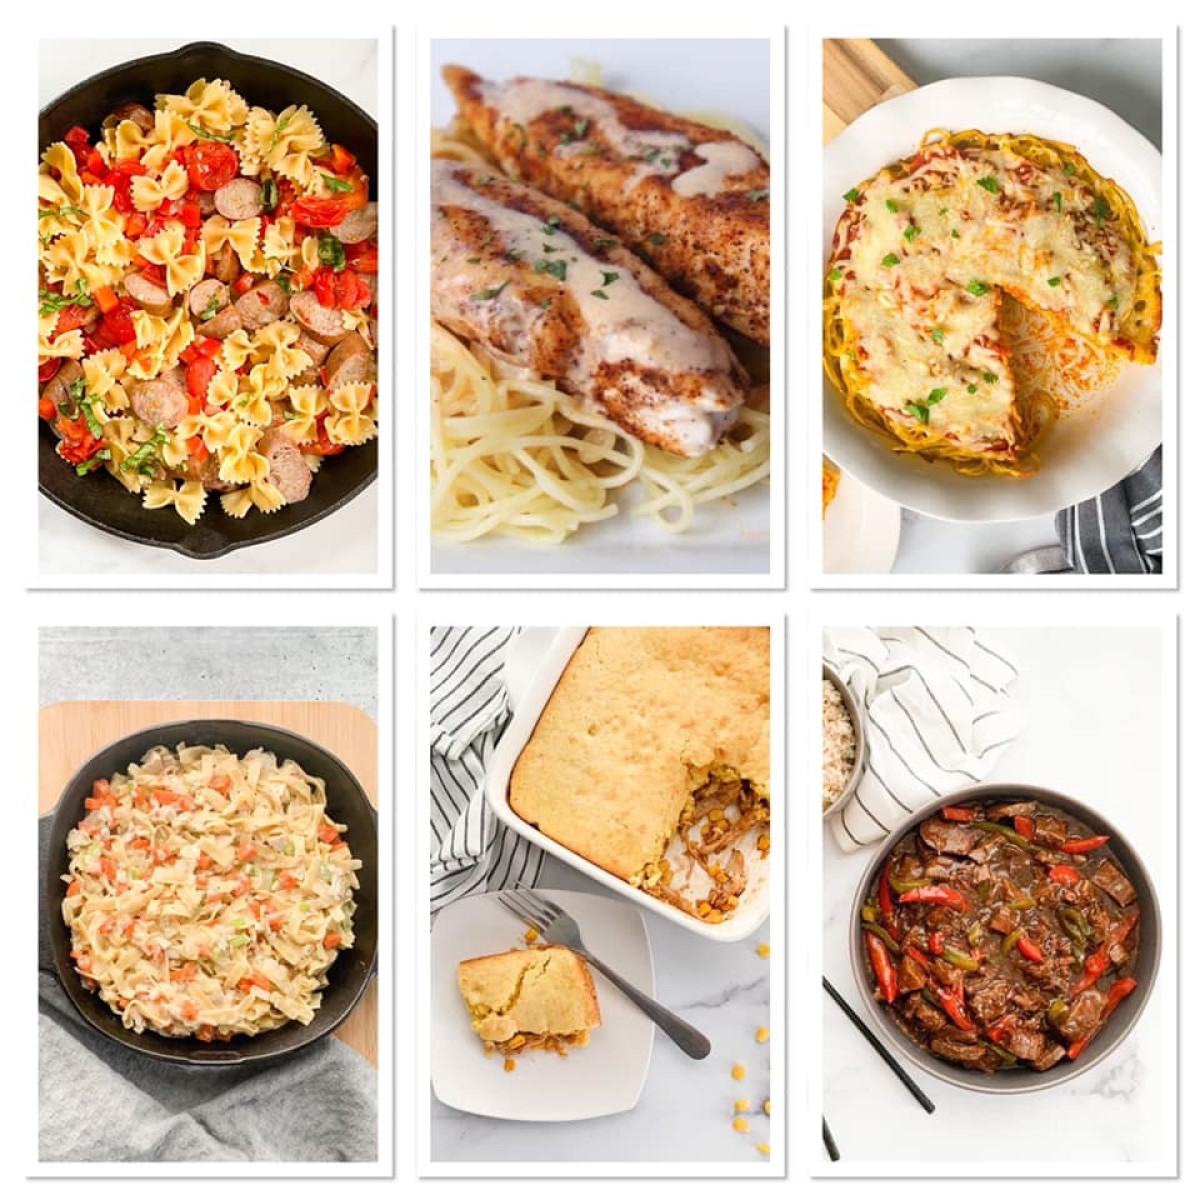 WW (Weight Watchers) Weekly Meal Plan #189